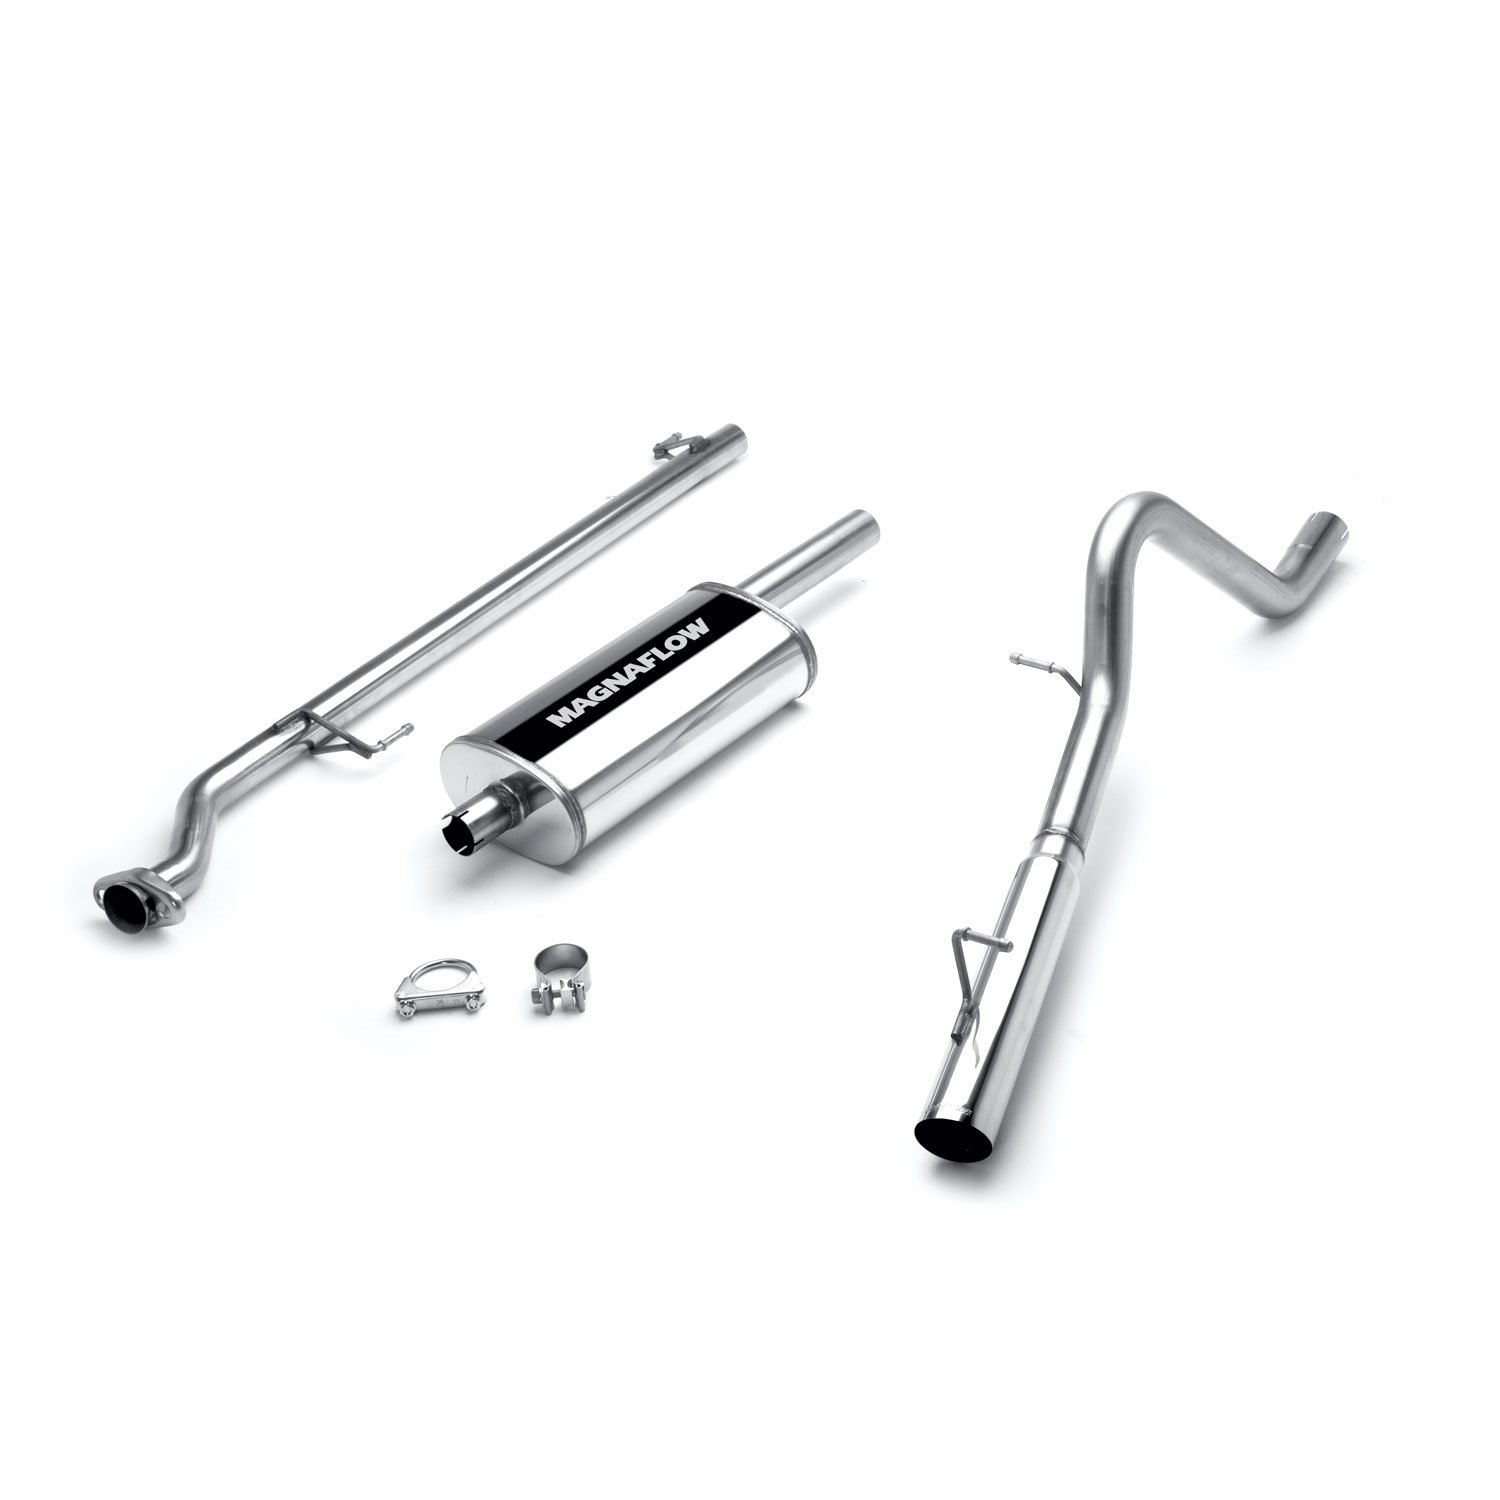 MF Series Cat-Back Exhaust System 2001-03 Ford Escape/Mazda Tribute 2.0L L4